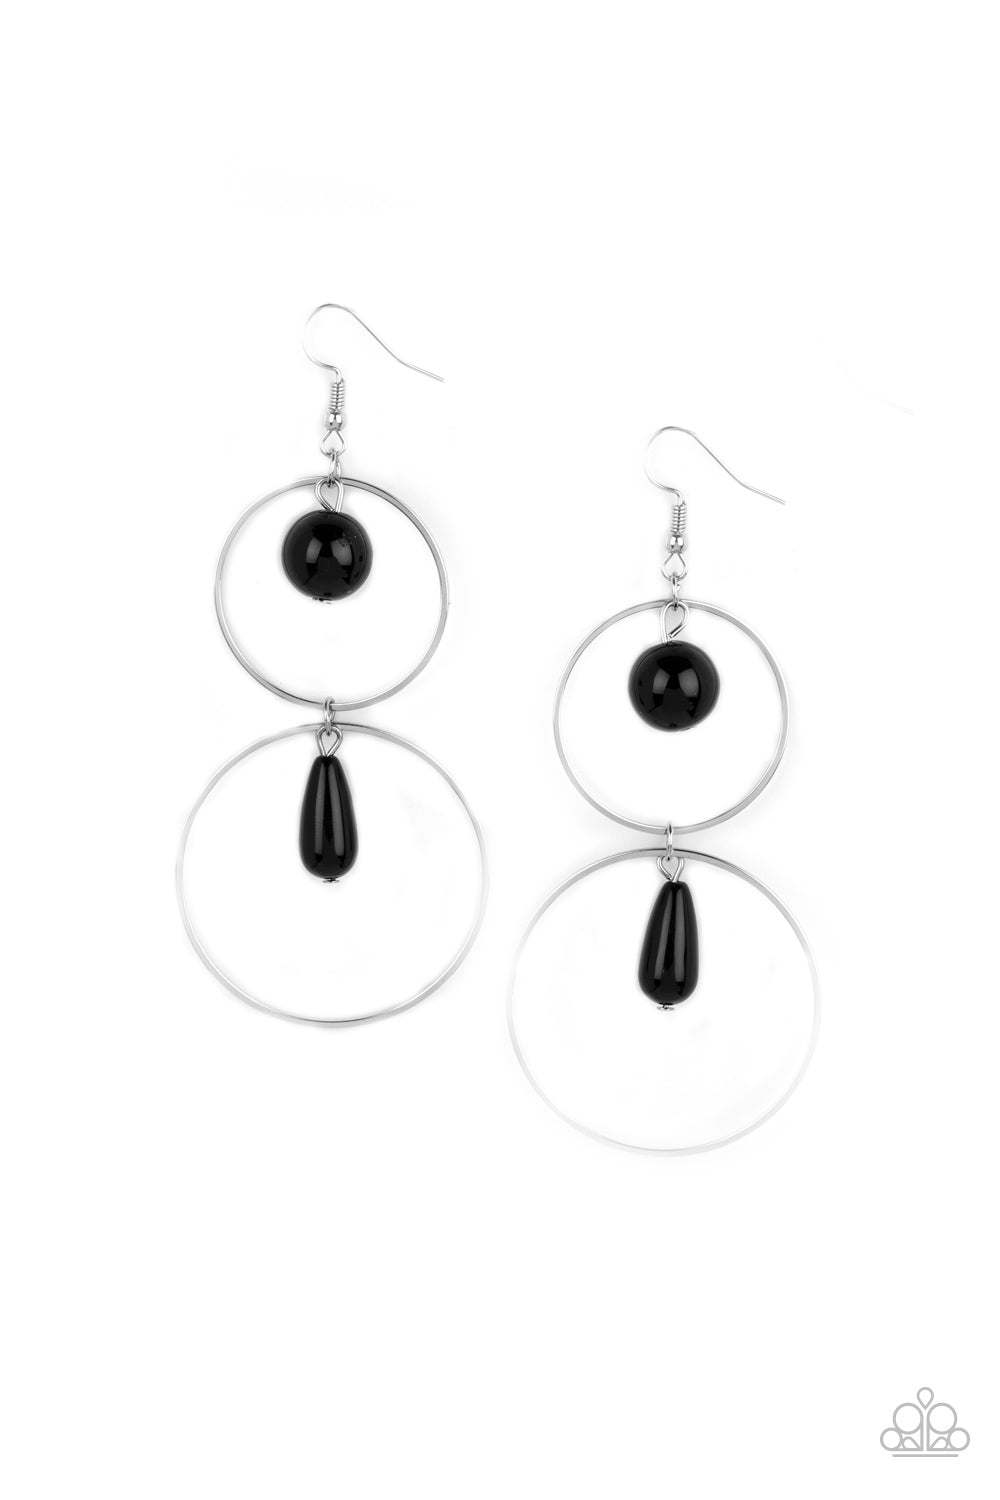 Cultured in Couture - Black Earrings